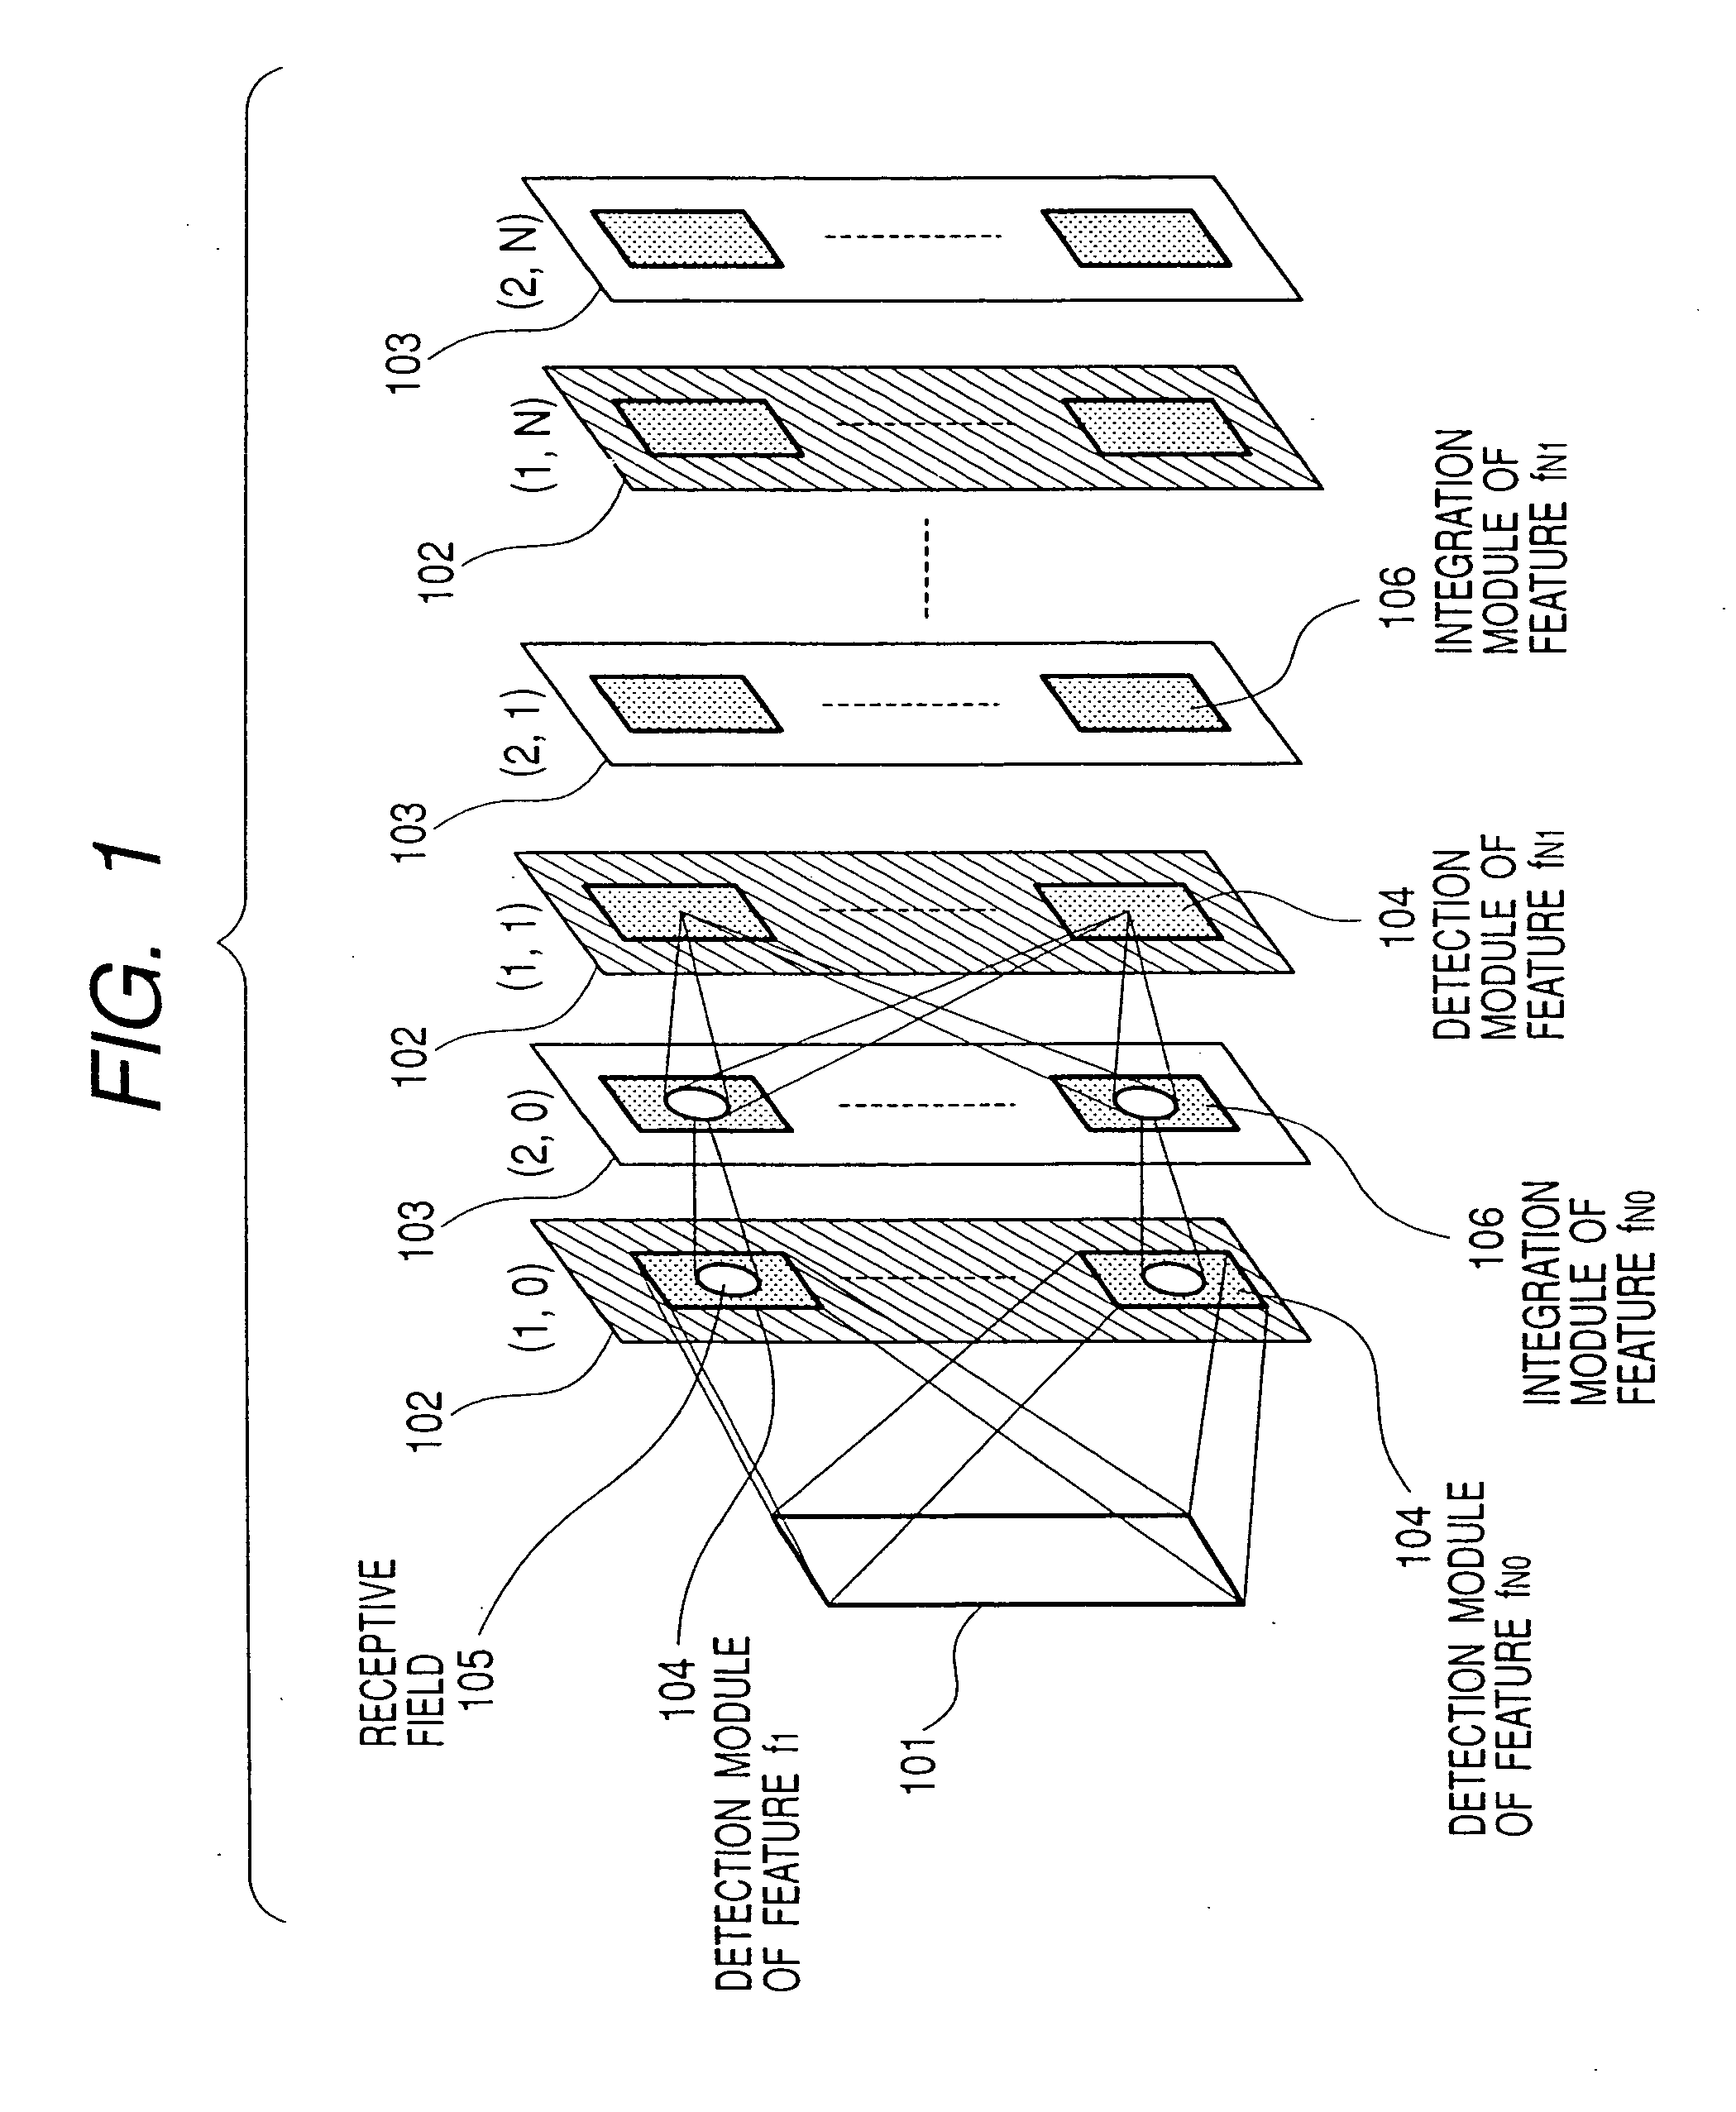 Pulse signal circuit, parallel processing circuit, pattern recognition system, and image input system